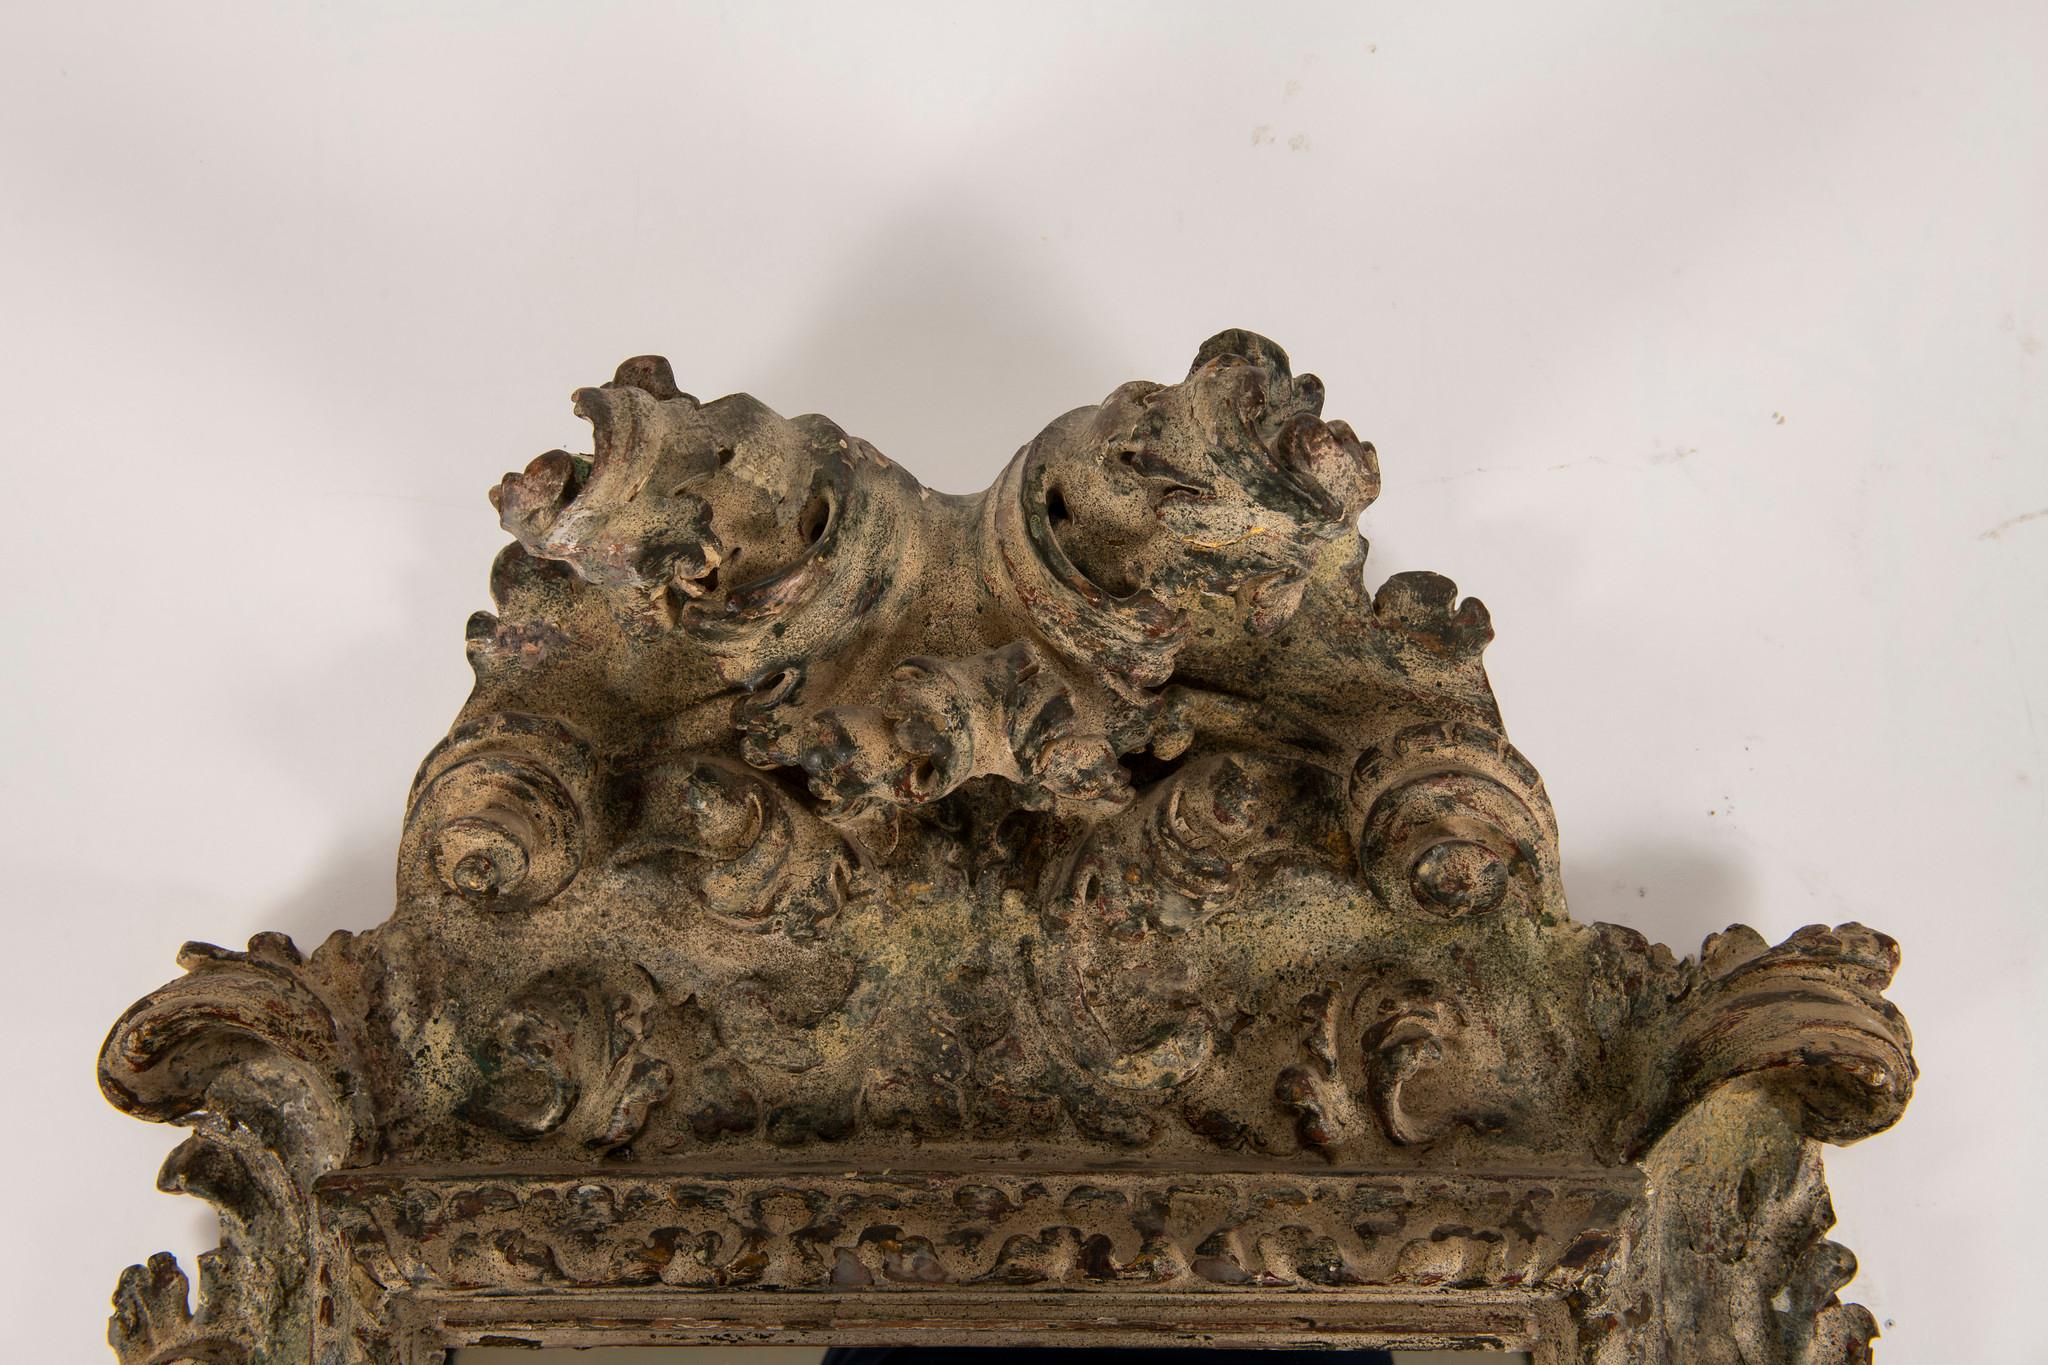 A beautiful ornately carved 19th century Spanish gesso mirror accented with flowers, scrolls and a large arching acanthus.